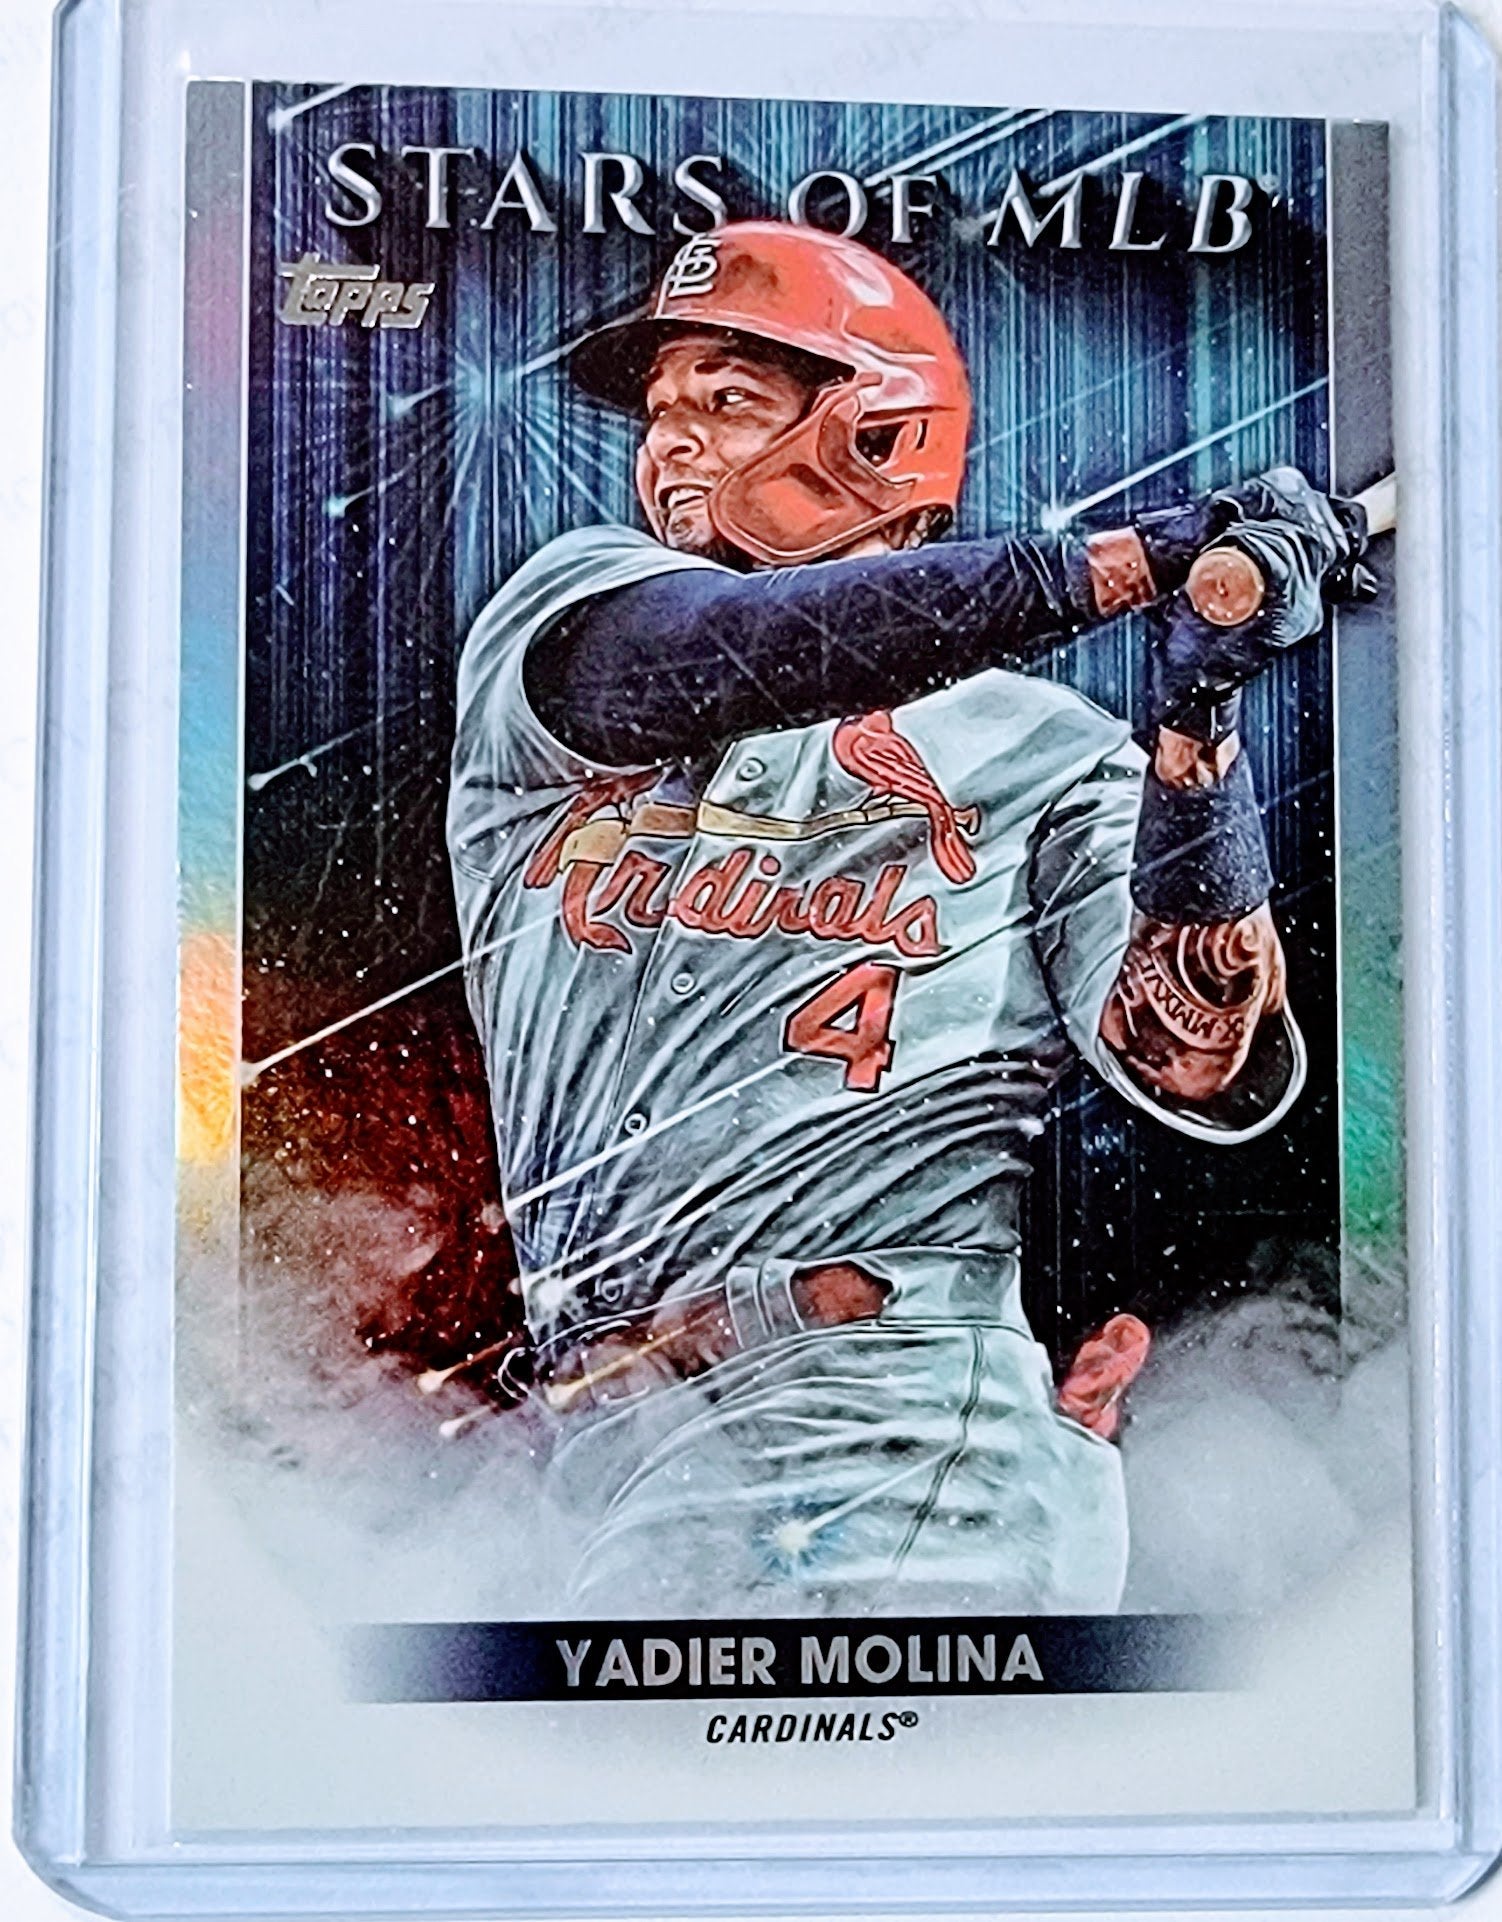 2022 Topps Yadier Molina Stars of the MLB Baseball Trading Card GRB1 simple Xclusive Collectibles   